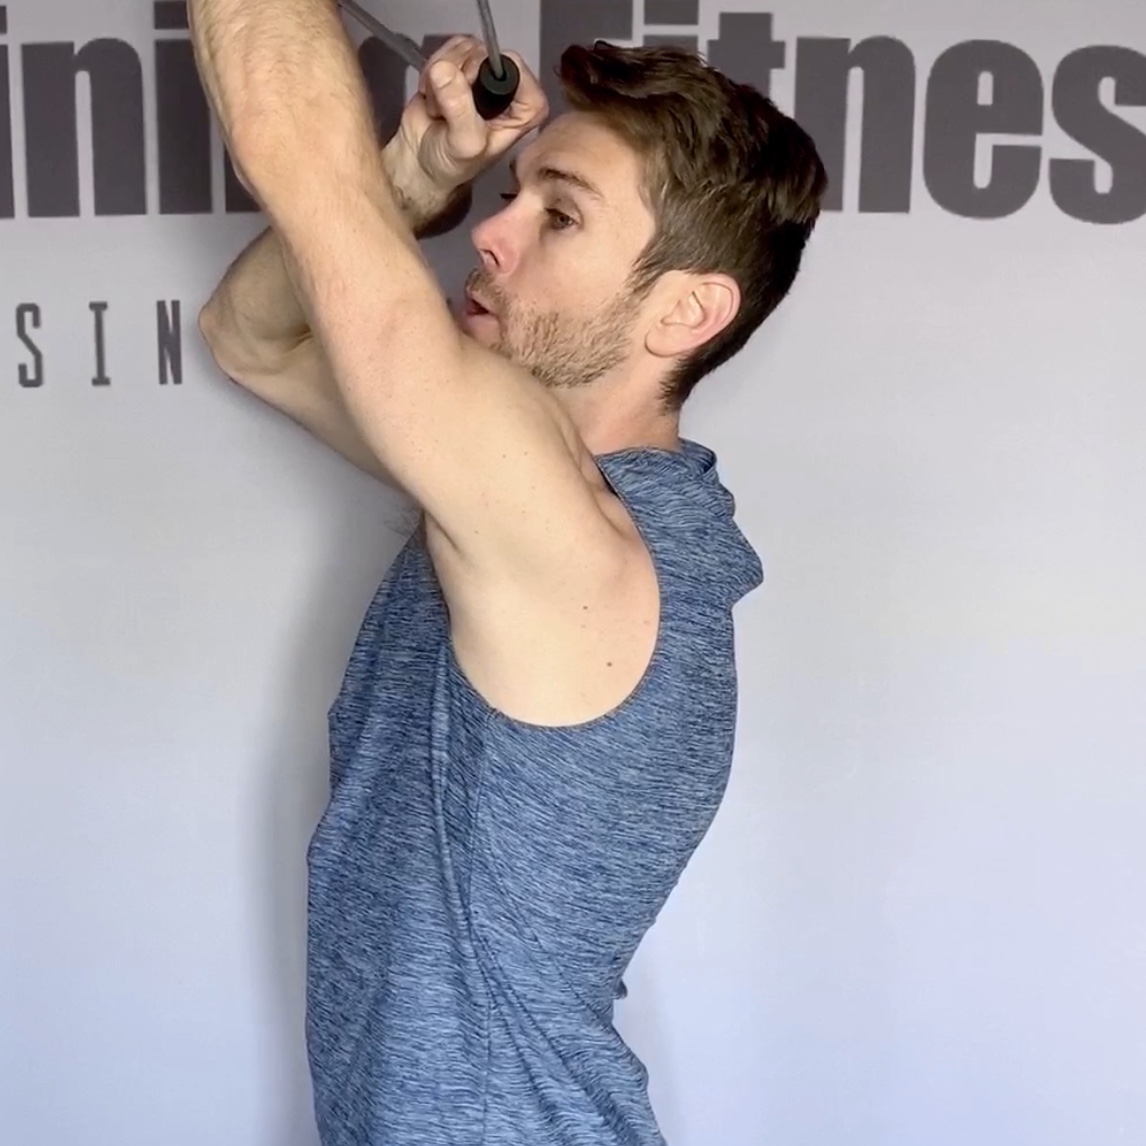 Tricep Exercises for Bigger Arms - Bullworker Personal Home Fitness